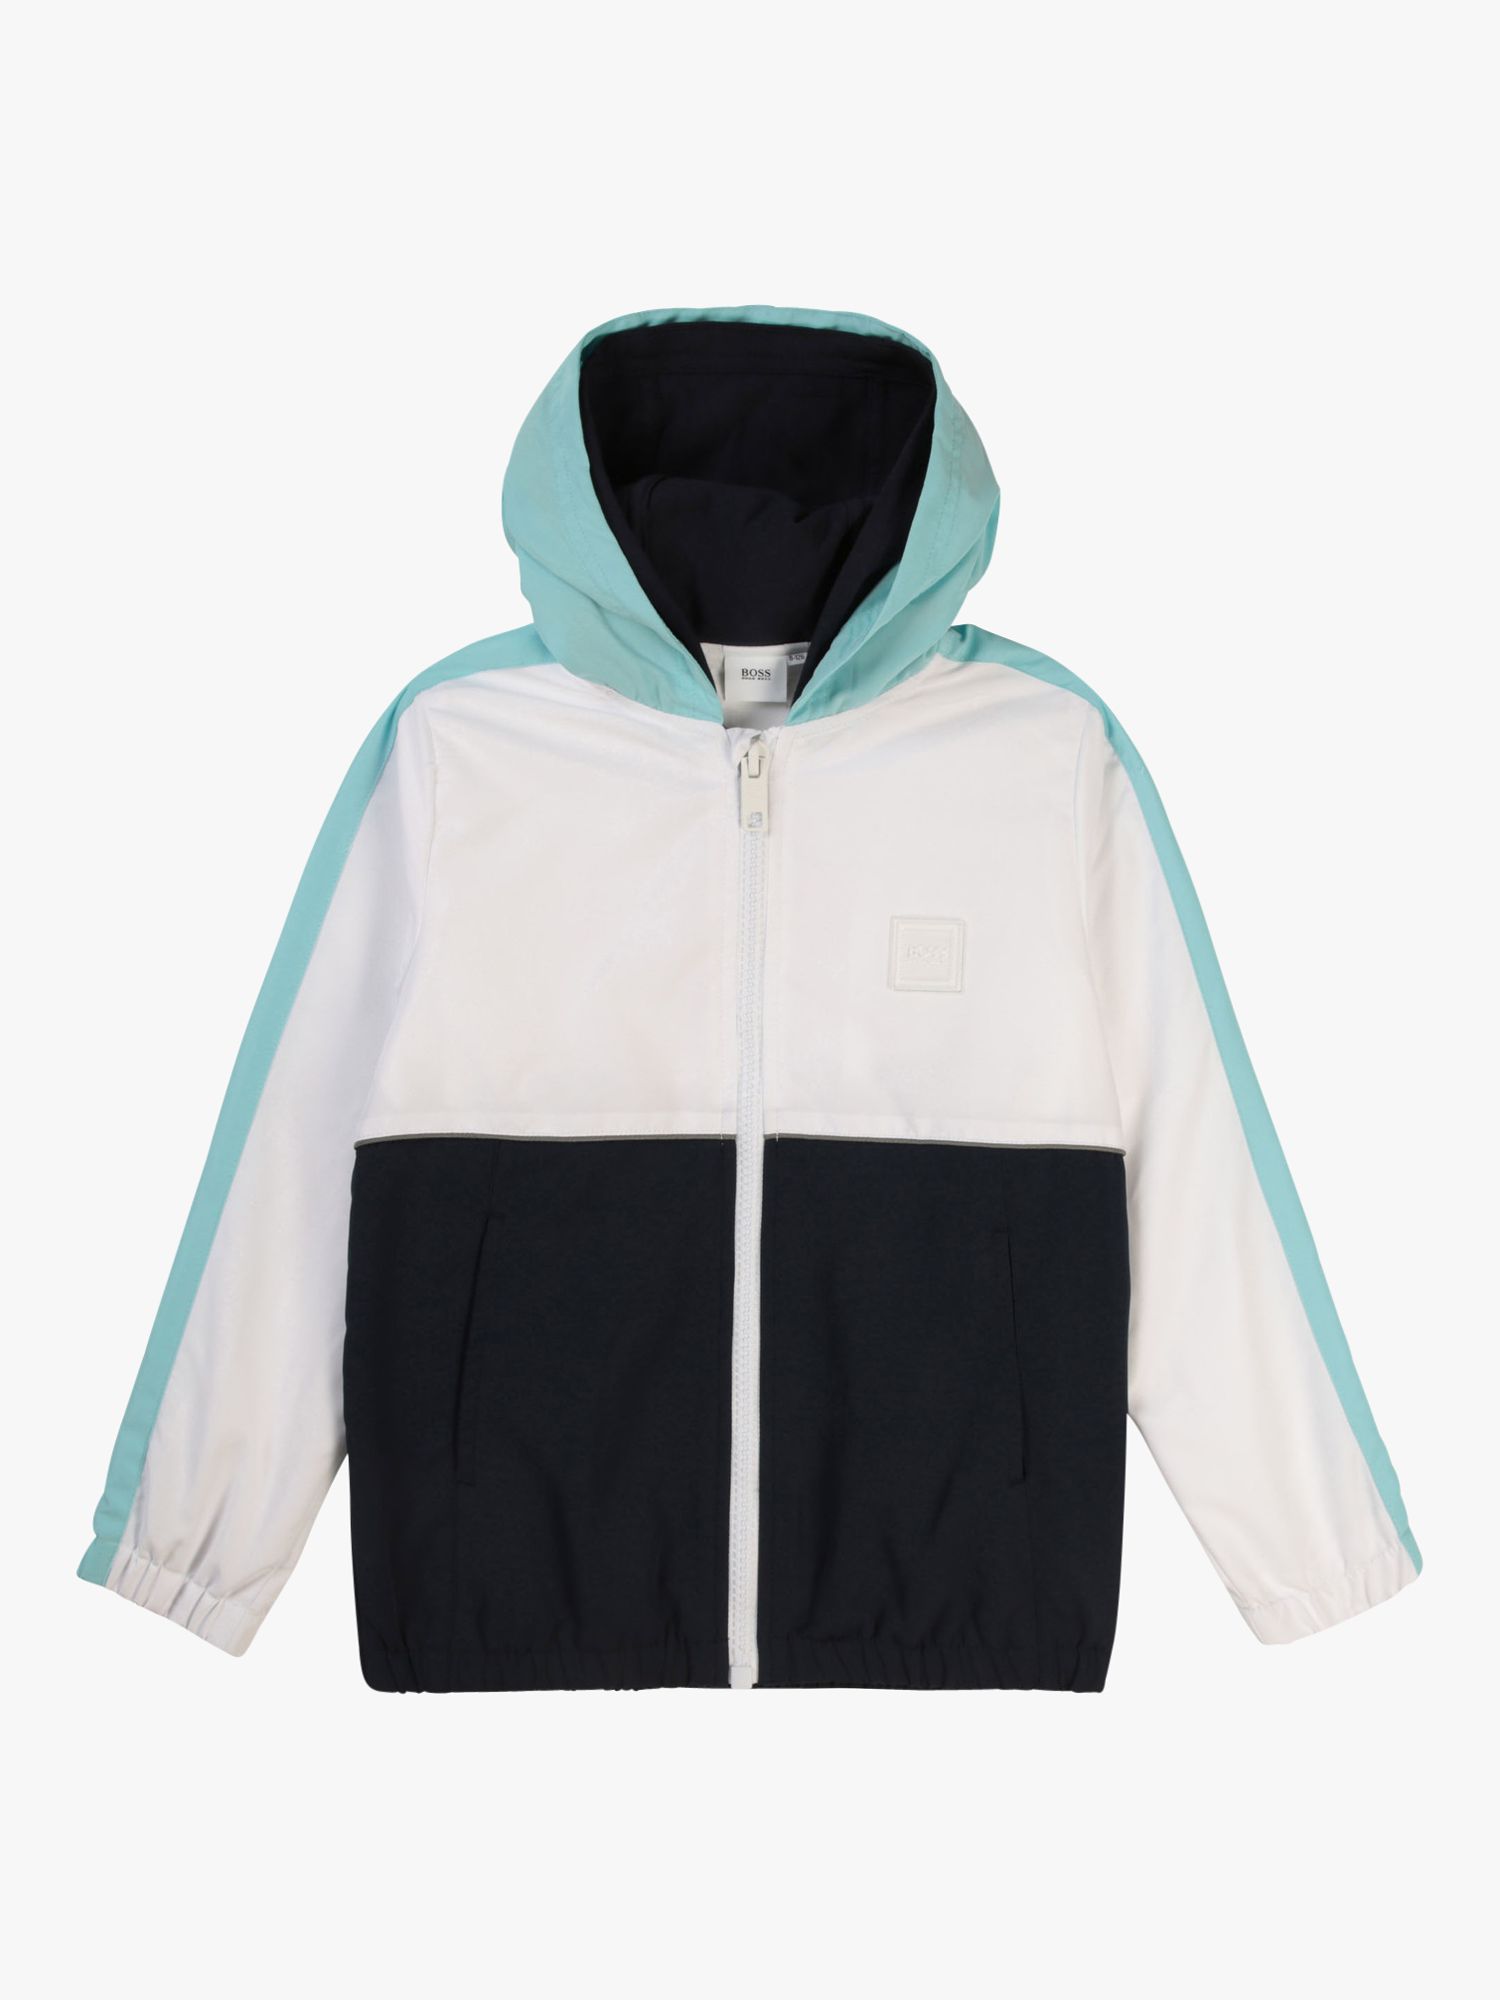 BOSS Kids' Hooded Jogging Cardigan, Unique, 5 years